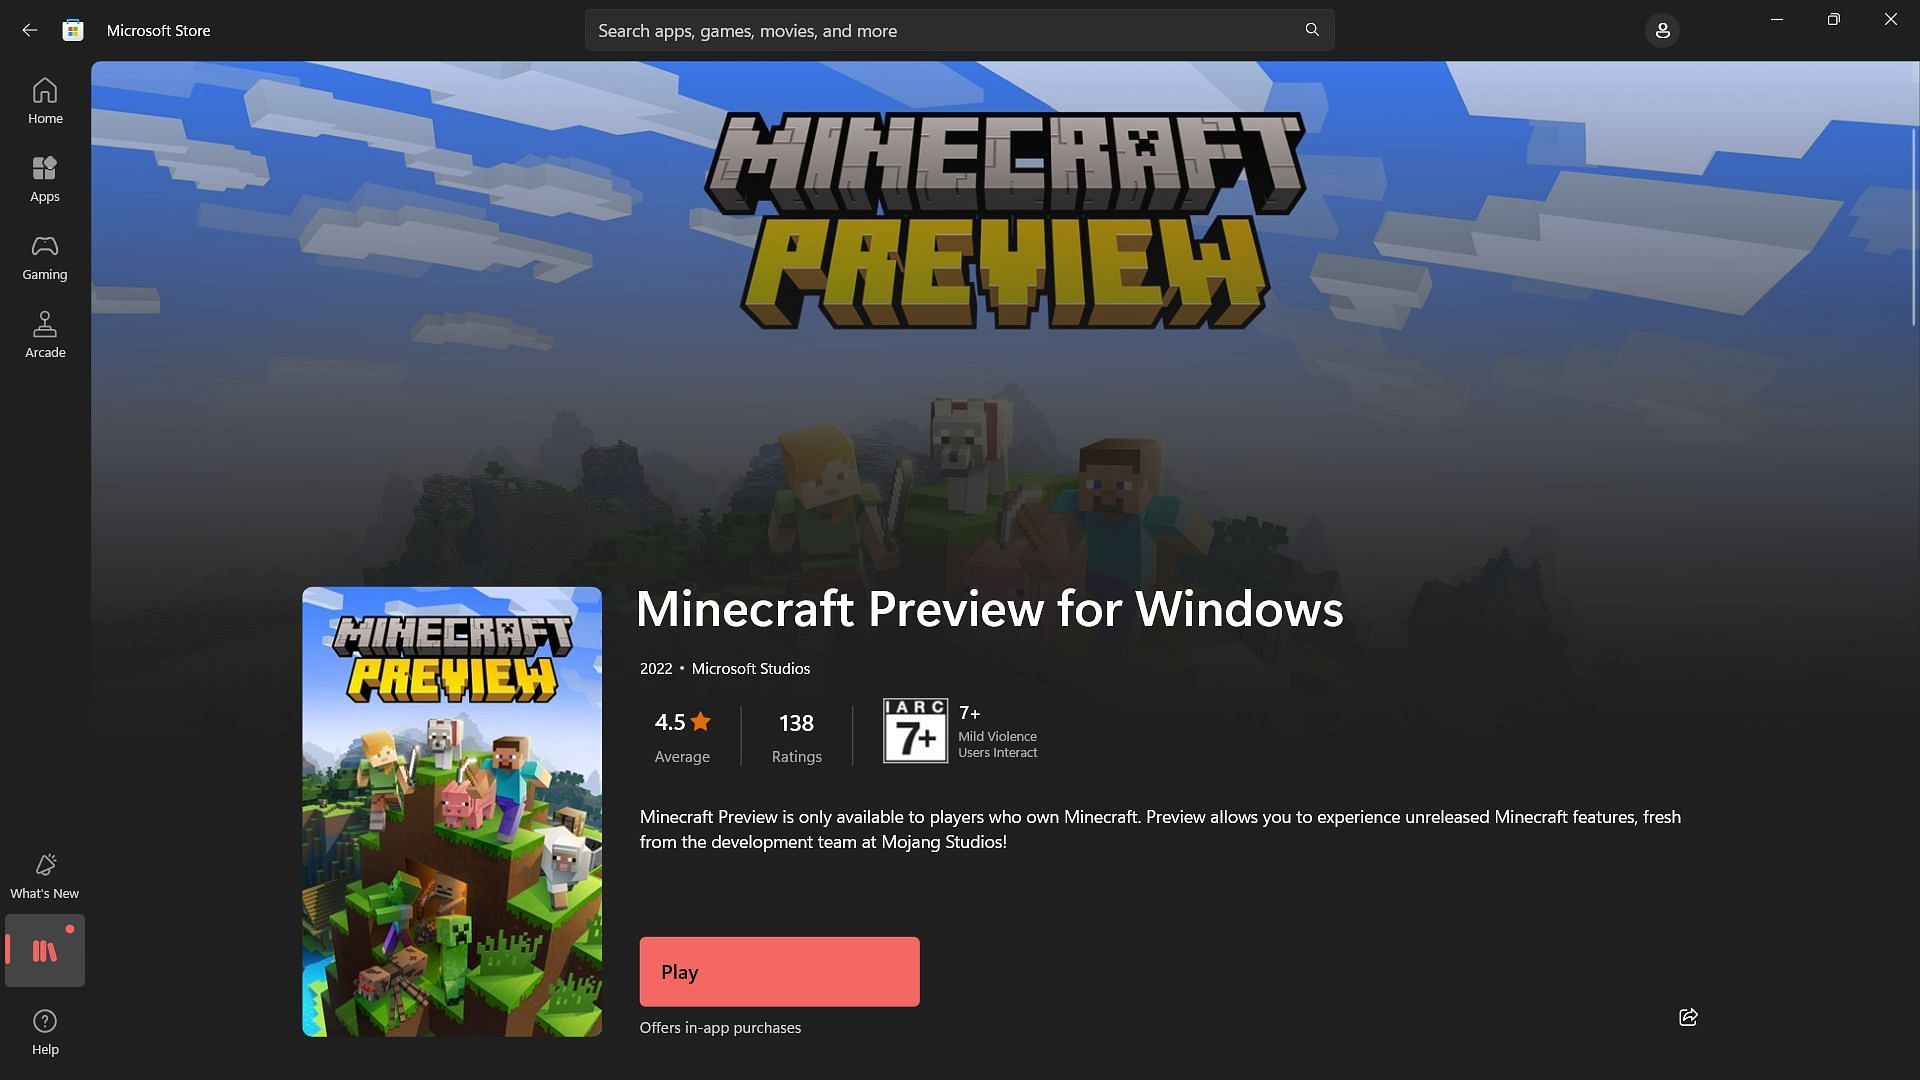 Players need to download the latest Bedrock preview version (Image via Microsoft)